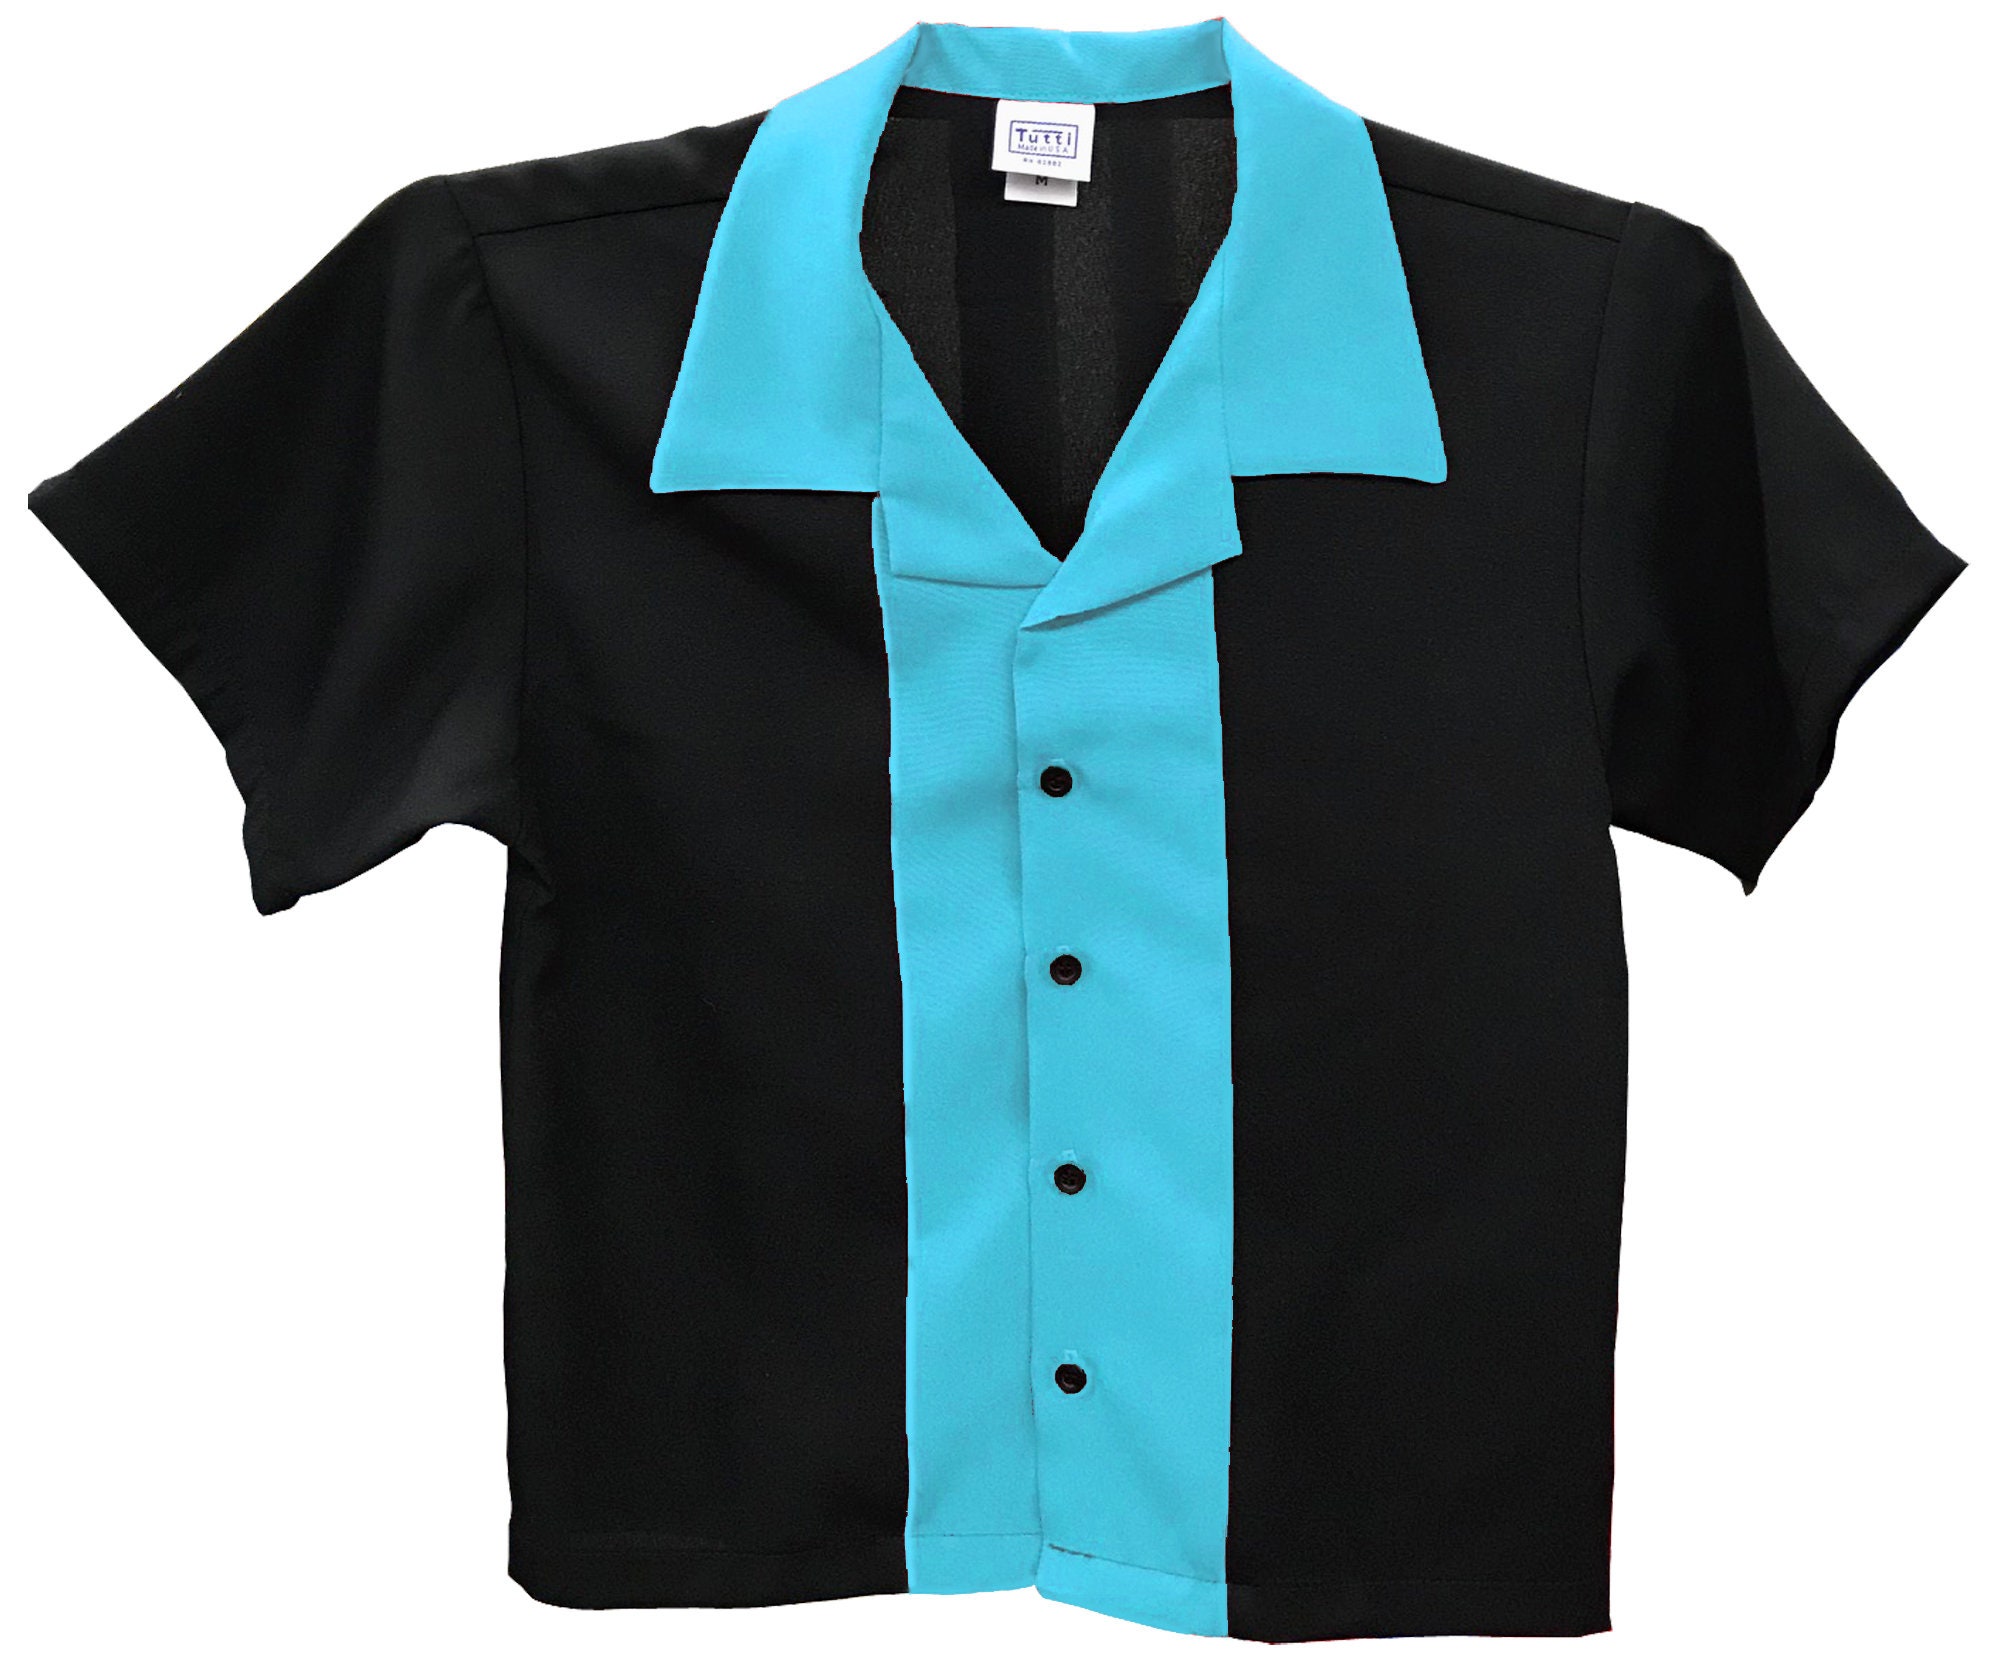 Kids Bowling Shirts - Free Shipping - Available in 8 New Colors in Kids ...